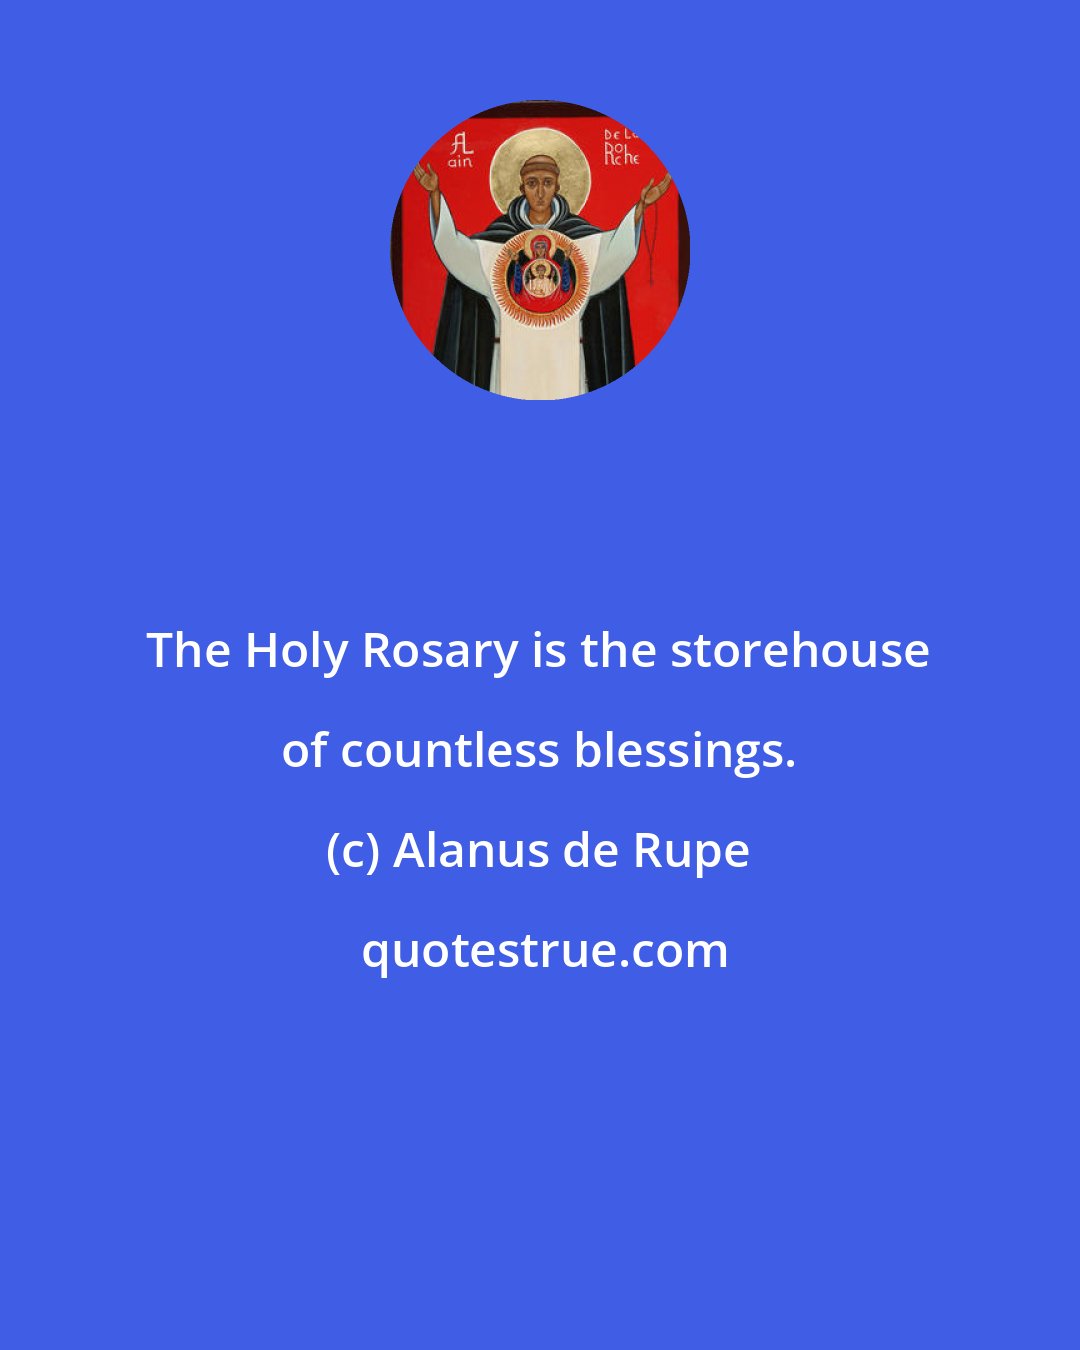 Alanus de Rupe: The Holy Rosary is the storehouse of countless blessings.